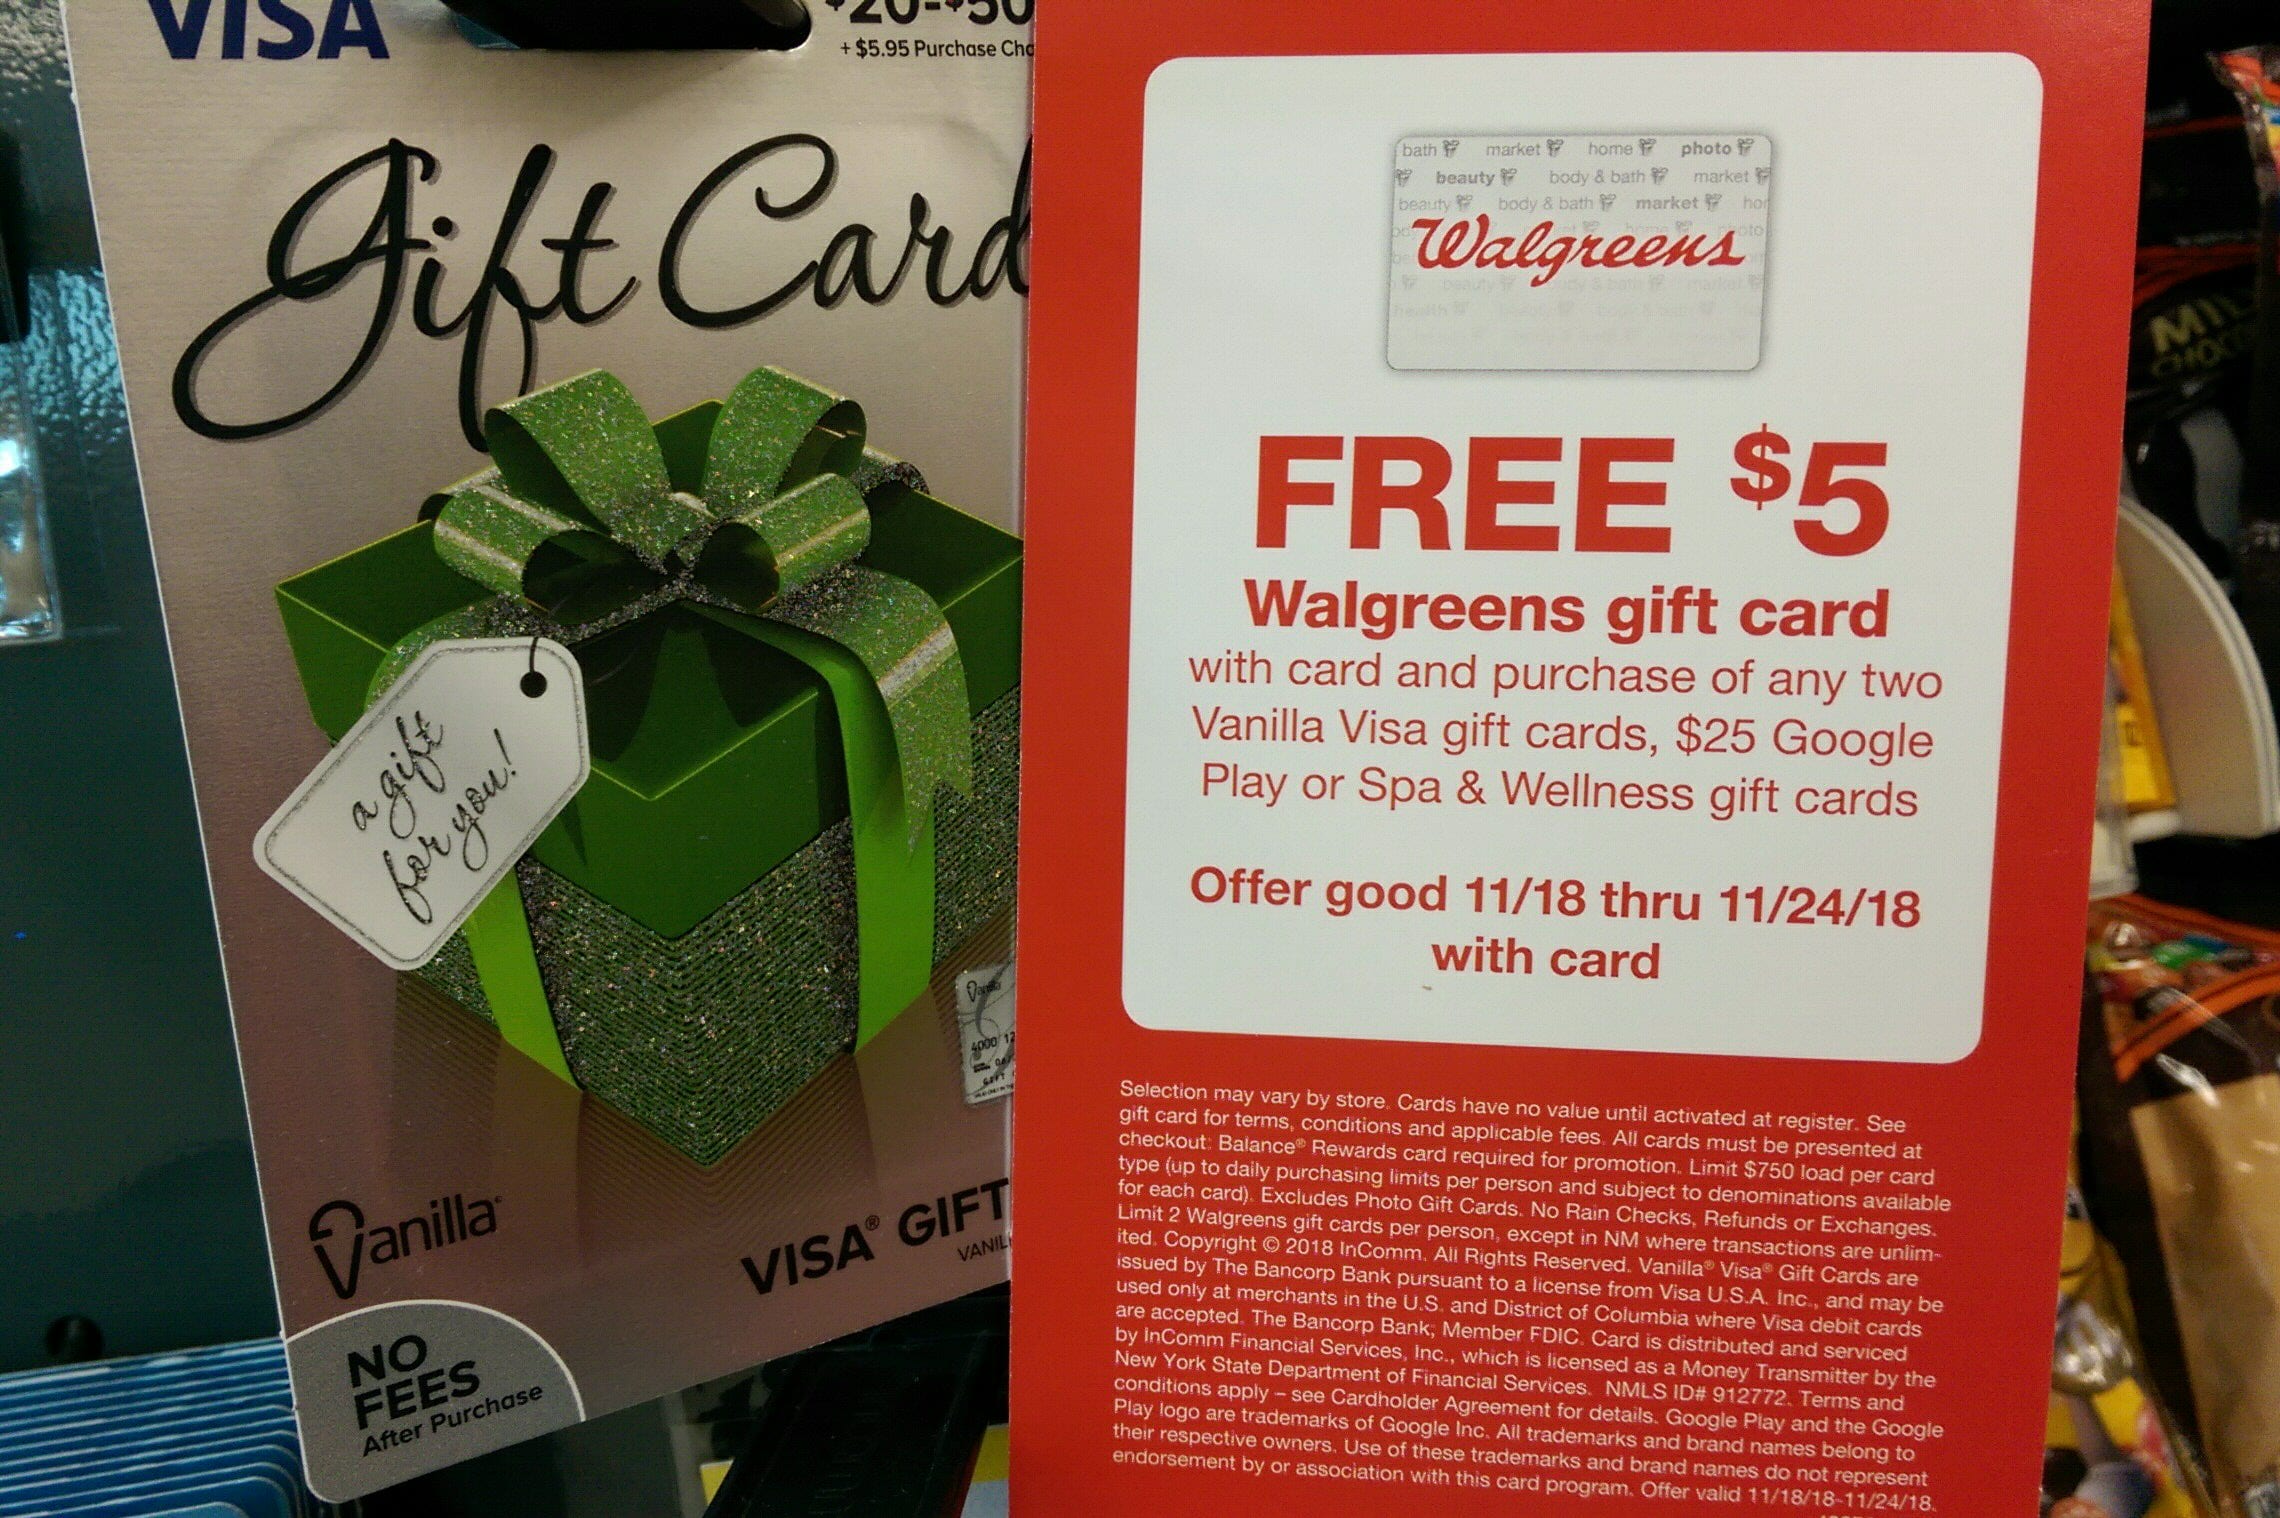 Get A Free 5 Walgreen S Gift Card With The Purchase Of Any Two Vanilla Visa Cards 25 Google Play Or Spa Wellness